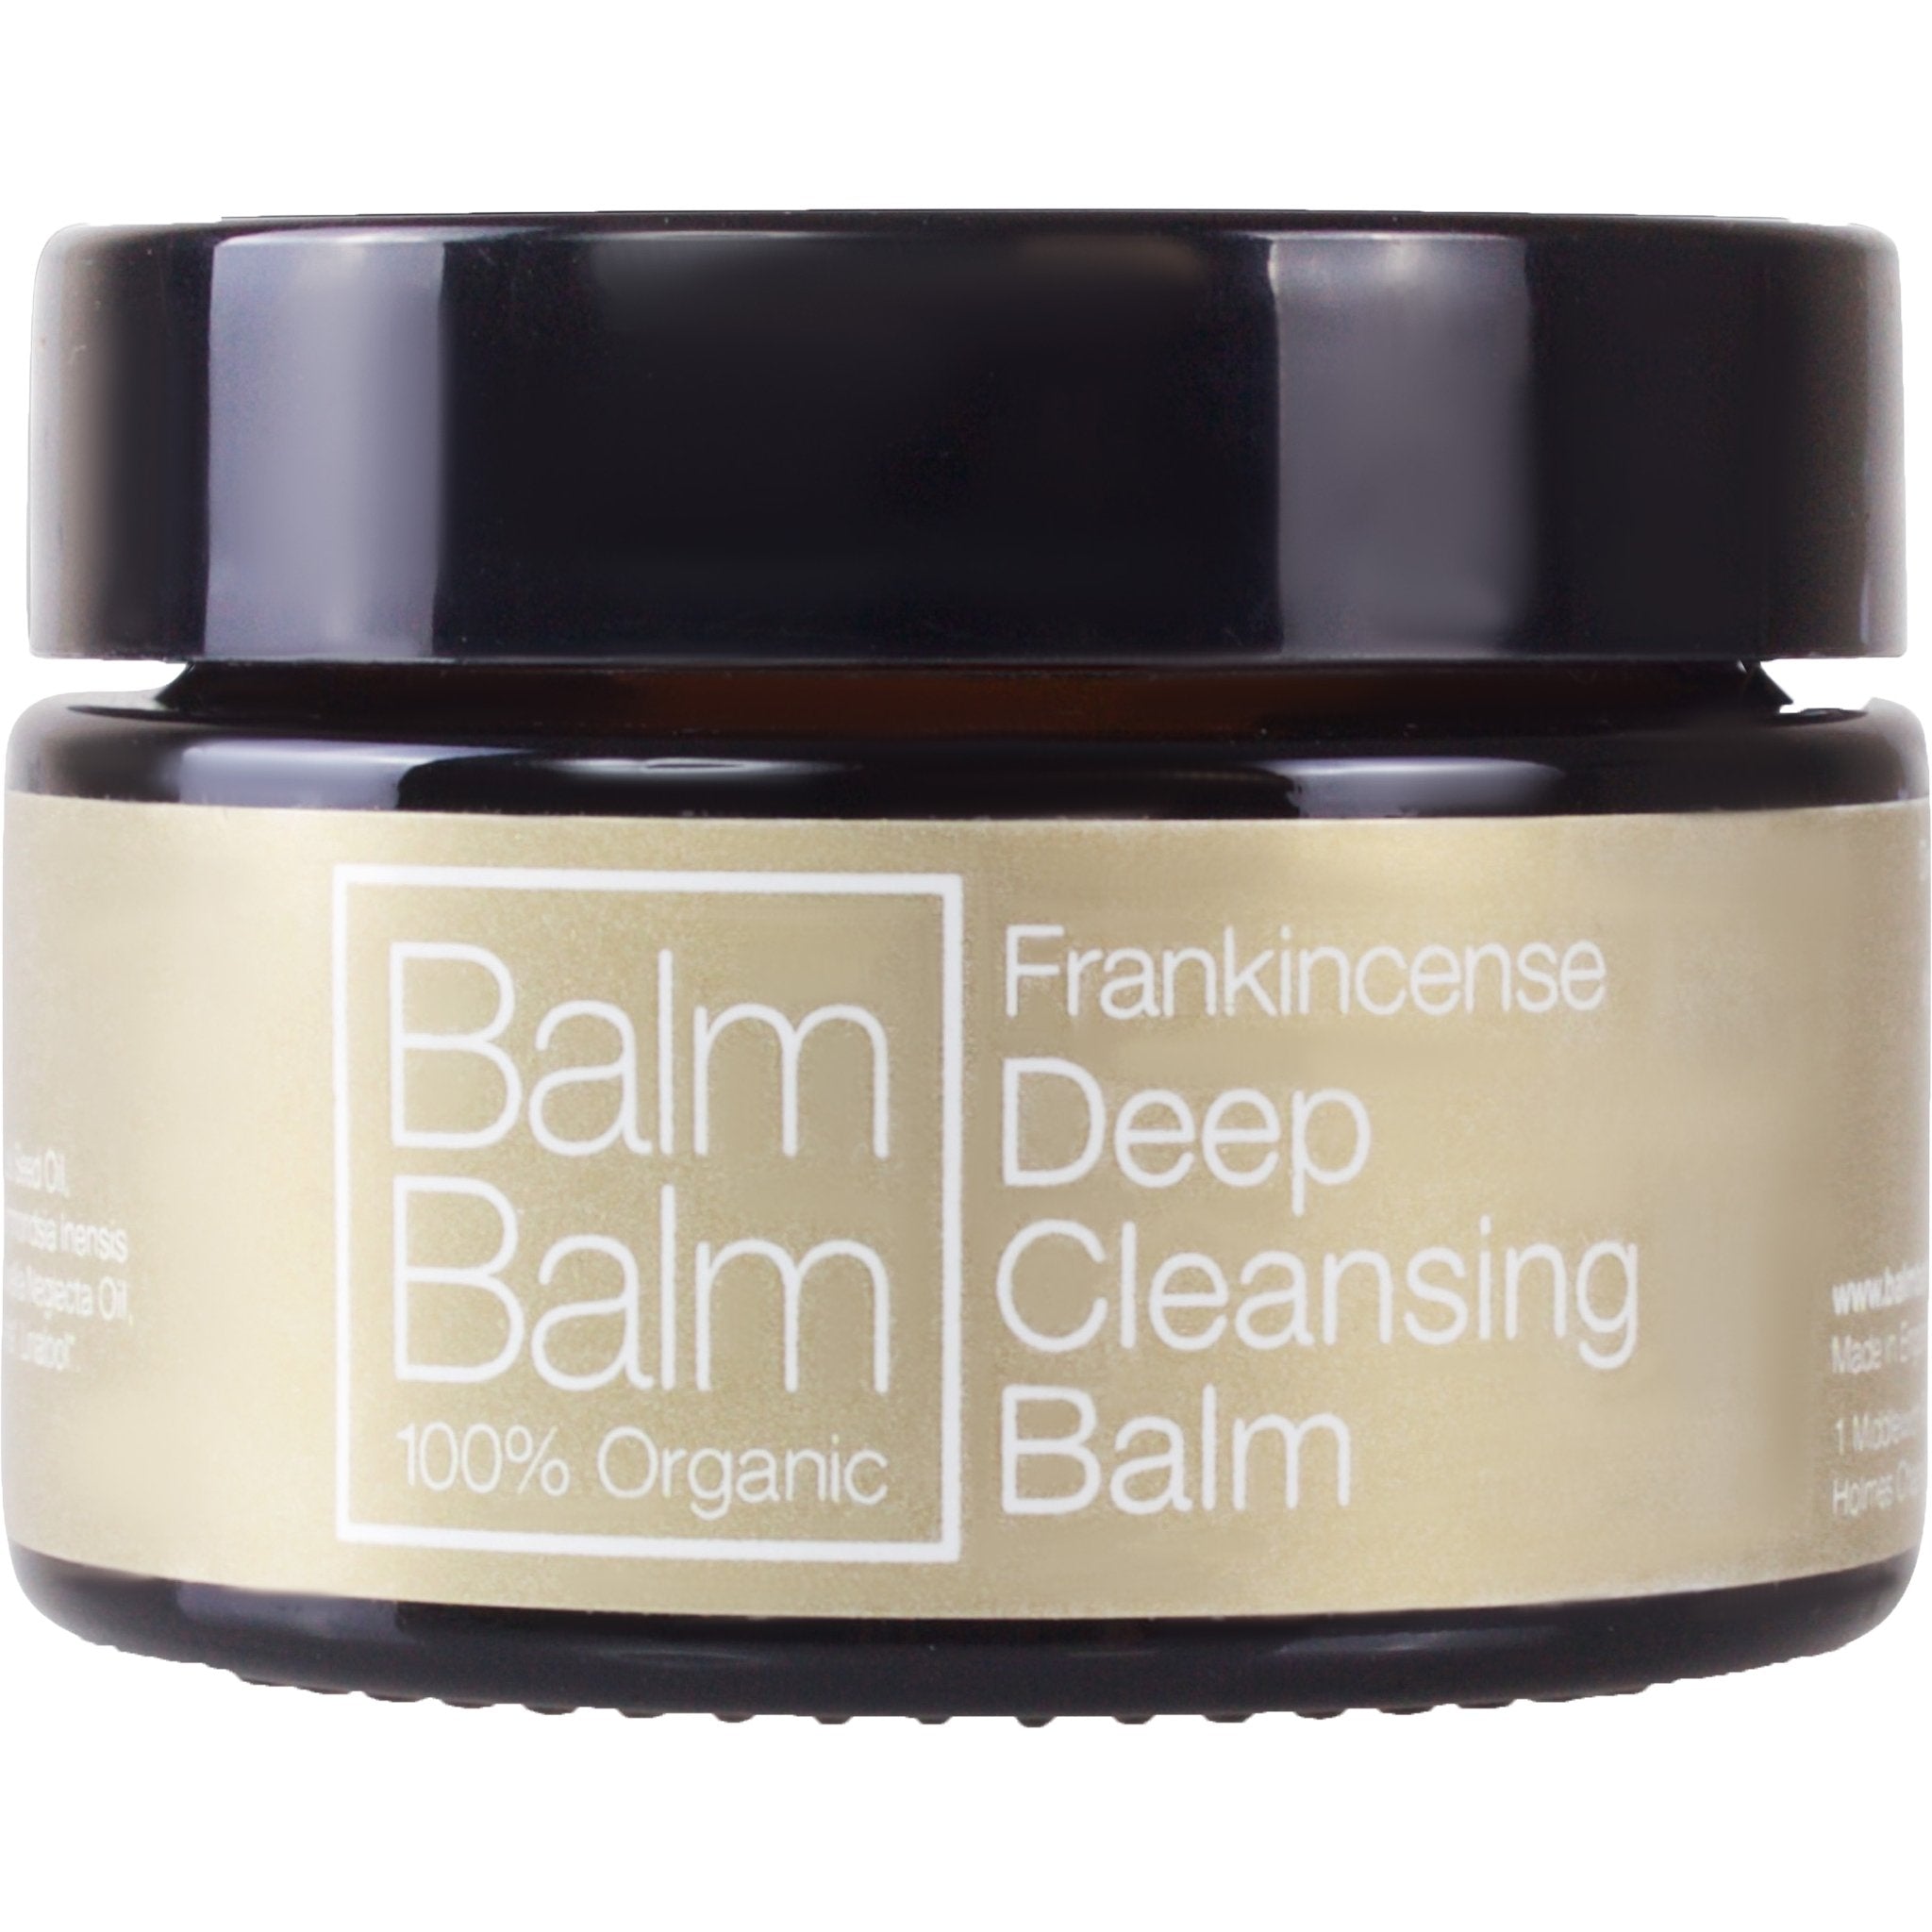 Frankincense Deep Cleansing Balm - mypure.co.uk